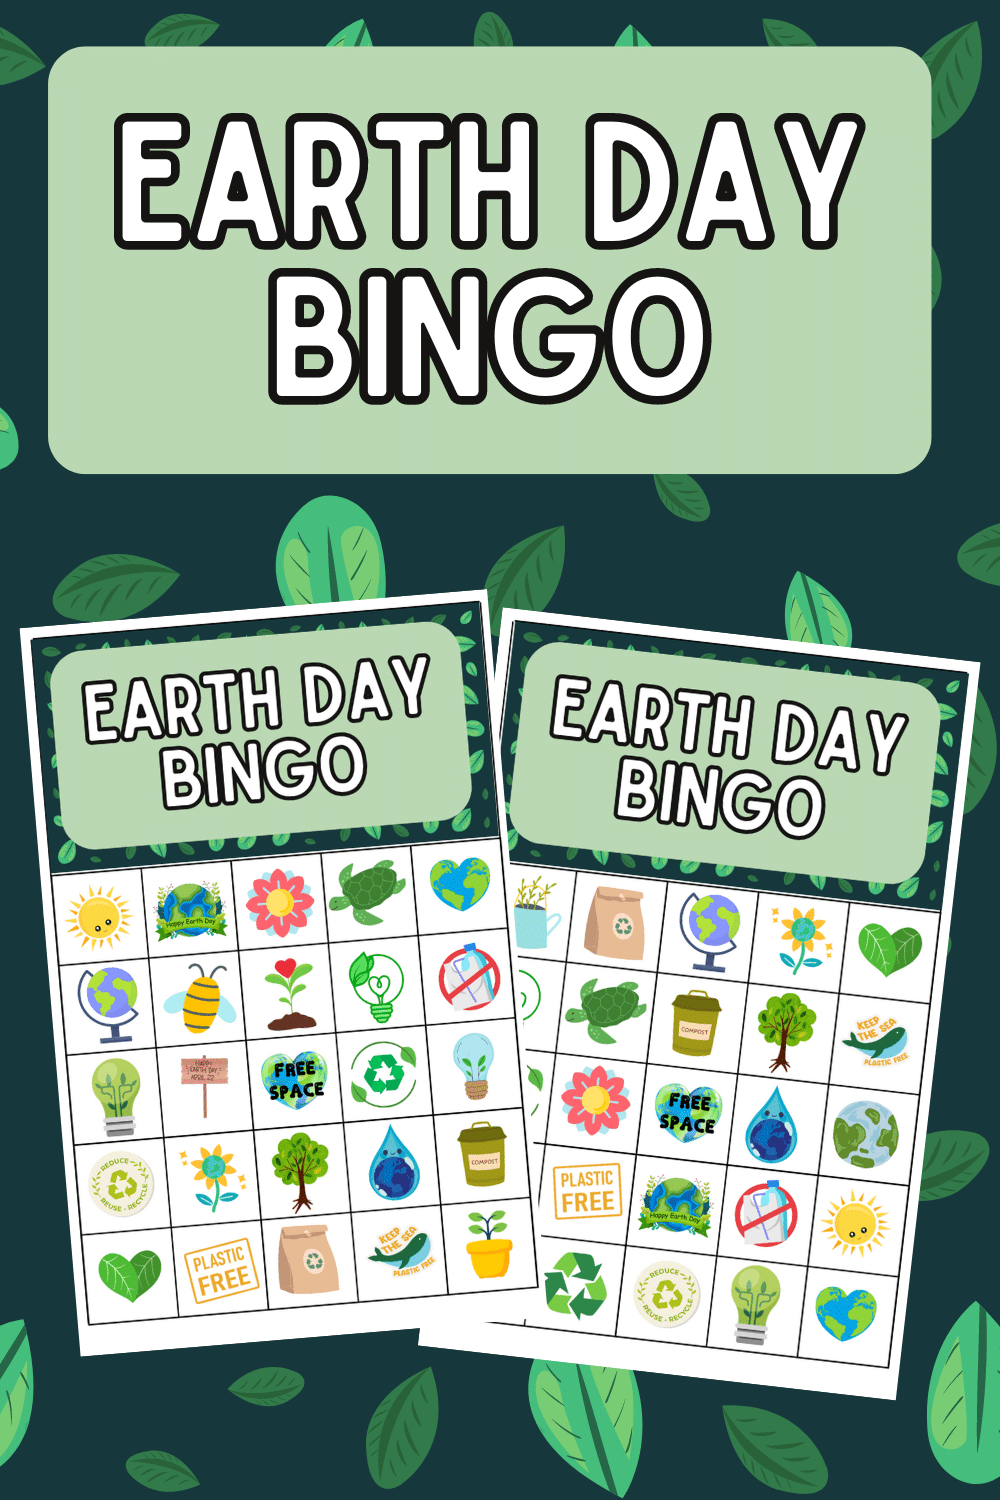 Earth Day Bingo Cards (Free Printable Cards)